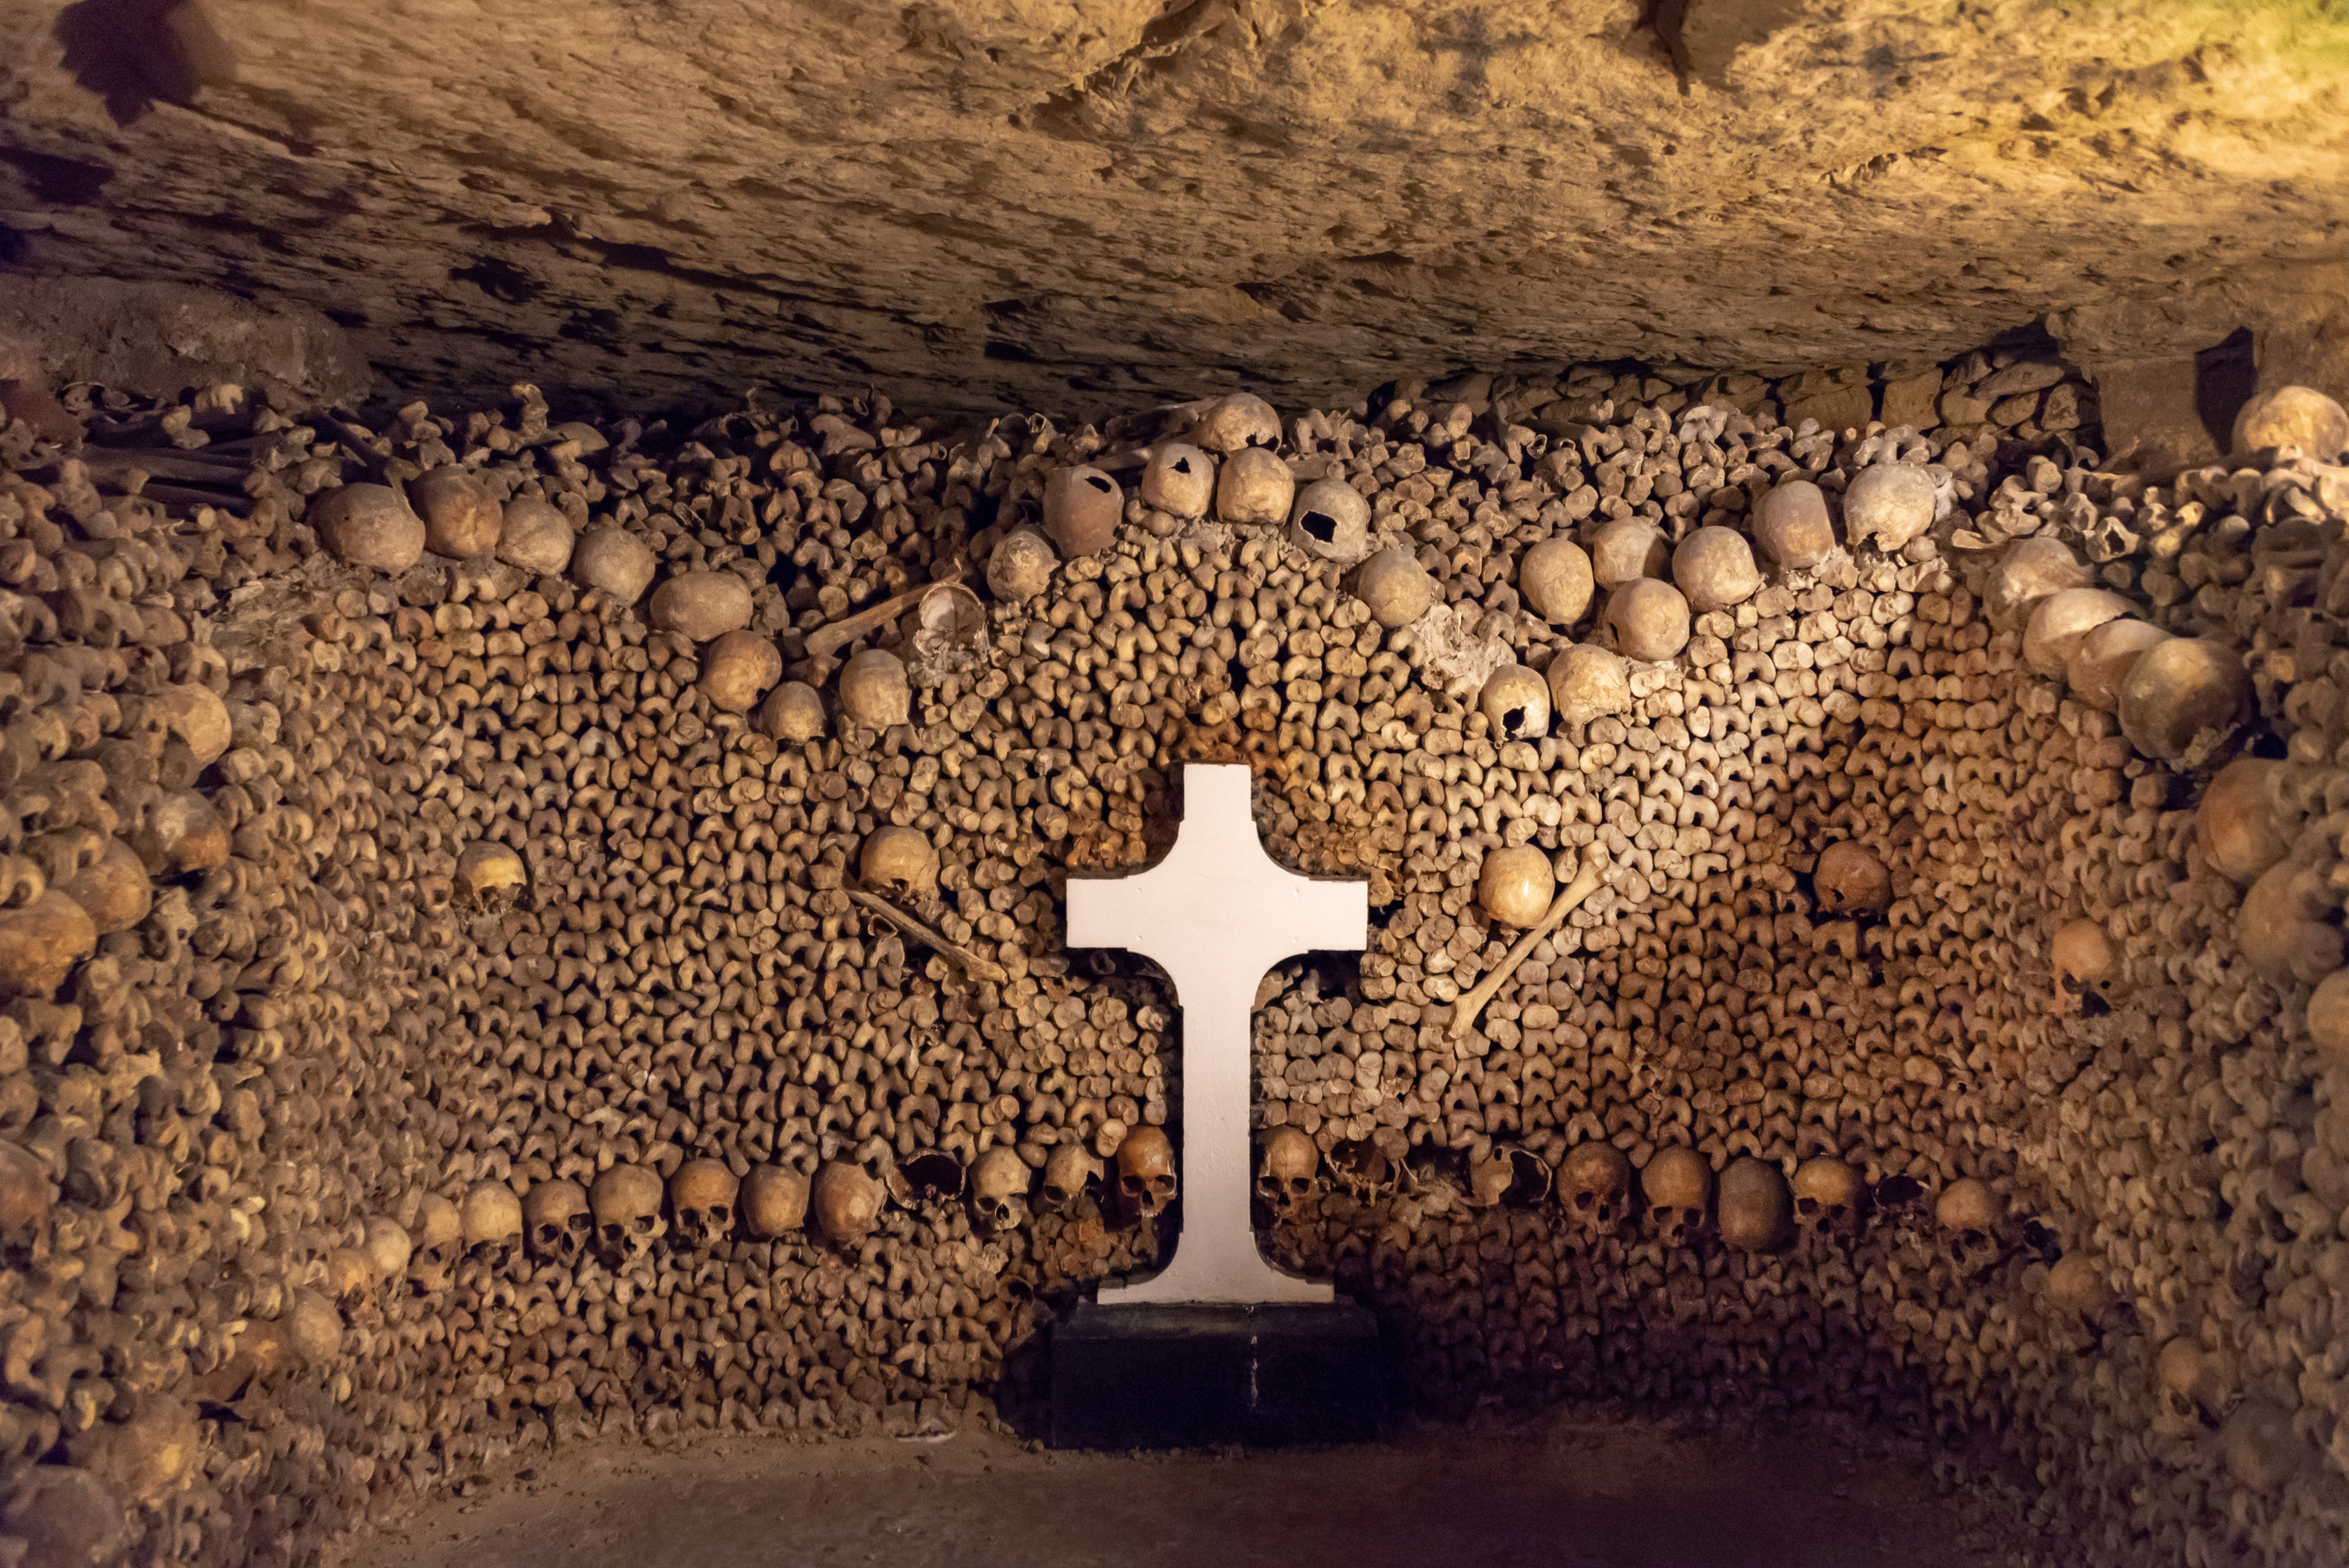 <p>If you’re a fan of the darker side of cities and don’t mind a bit of creepiness, you need to check out the catacombs on your next trip to Paris. This maze of underground passageways located in the heart of the city was once used as the burial site for inhabitants. You’ll wander past centuries-old graves and amongst walls of real bones and skulls.</p><p>You may also like: <a href='https://www.yardbarker.com/lifestyle/articles/24_things_you_didnt_know_about_subway_020224/s1__39859605'>24 things you didn’t know about Subway</a></p>